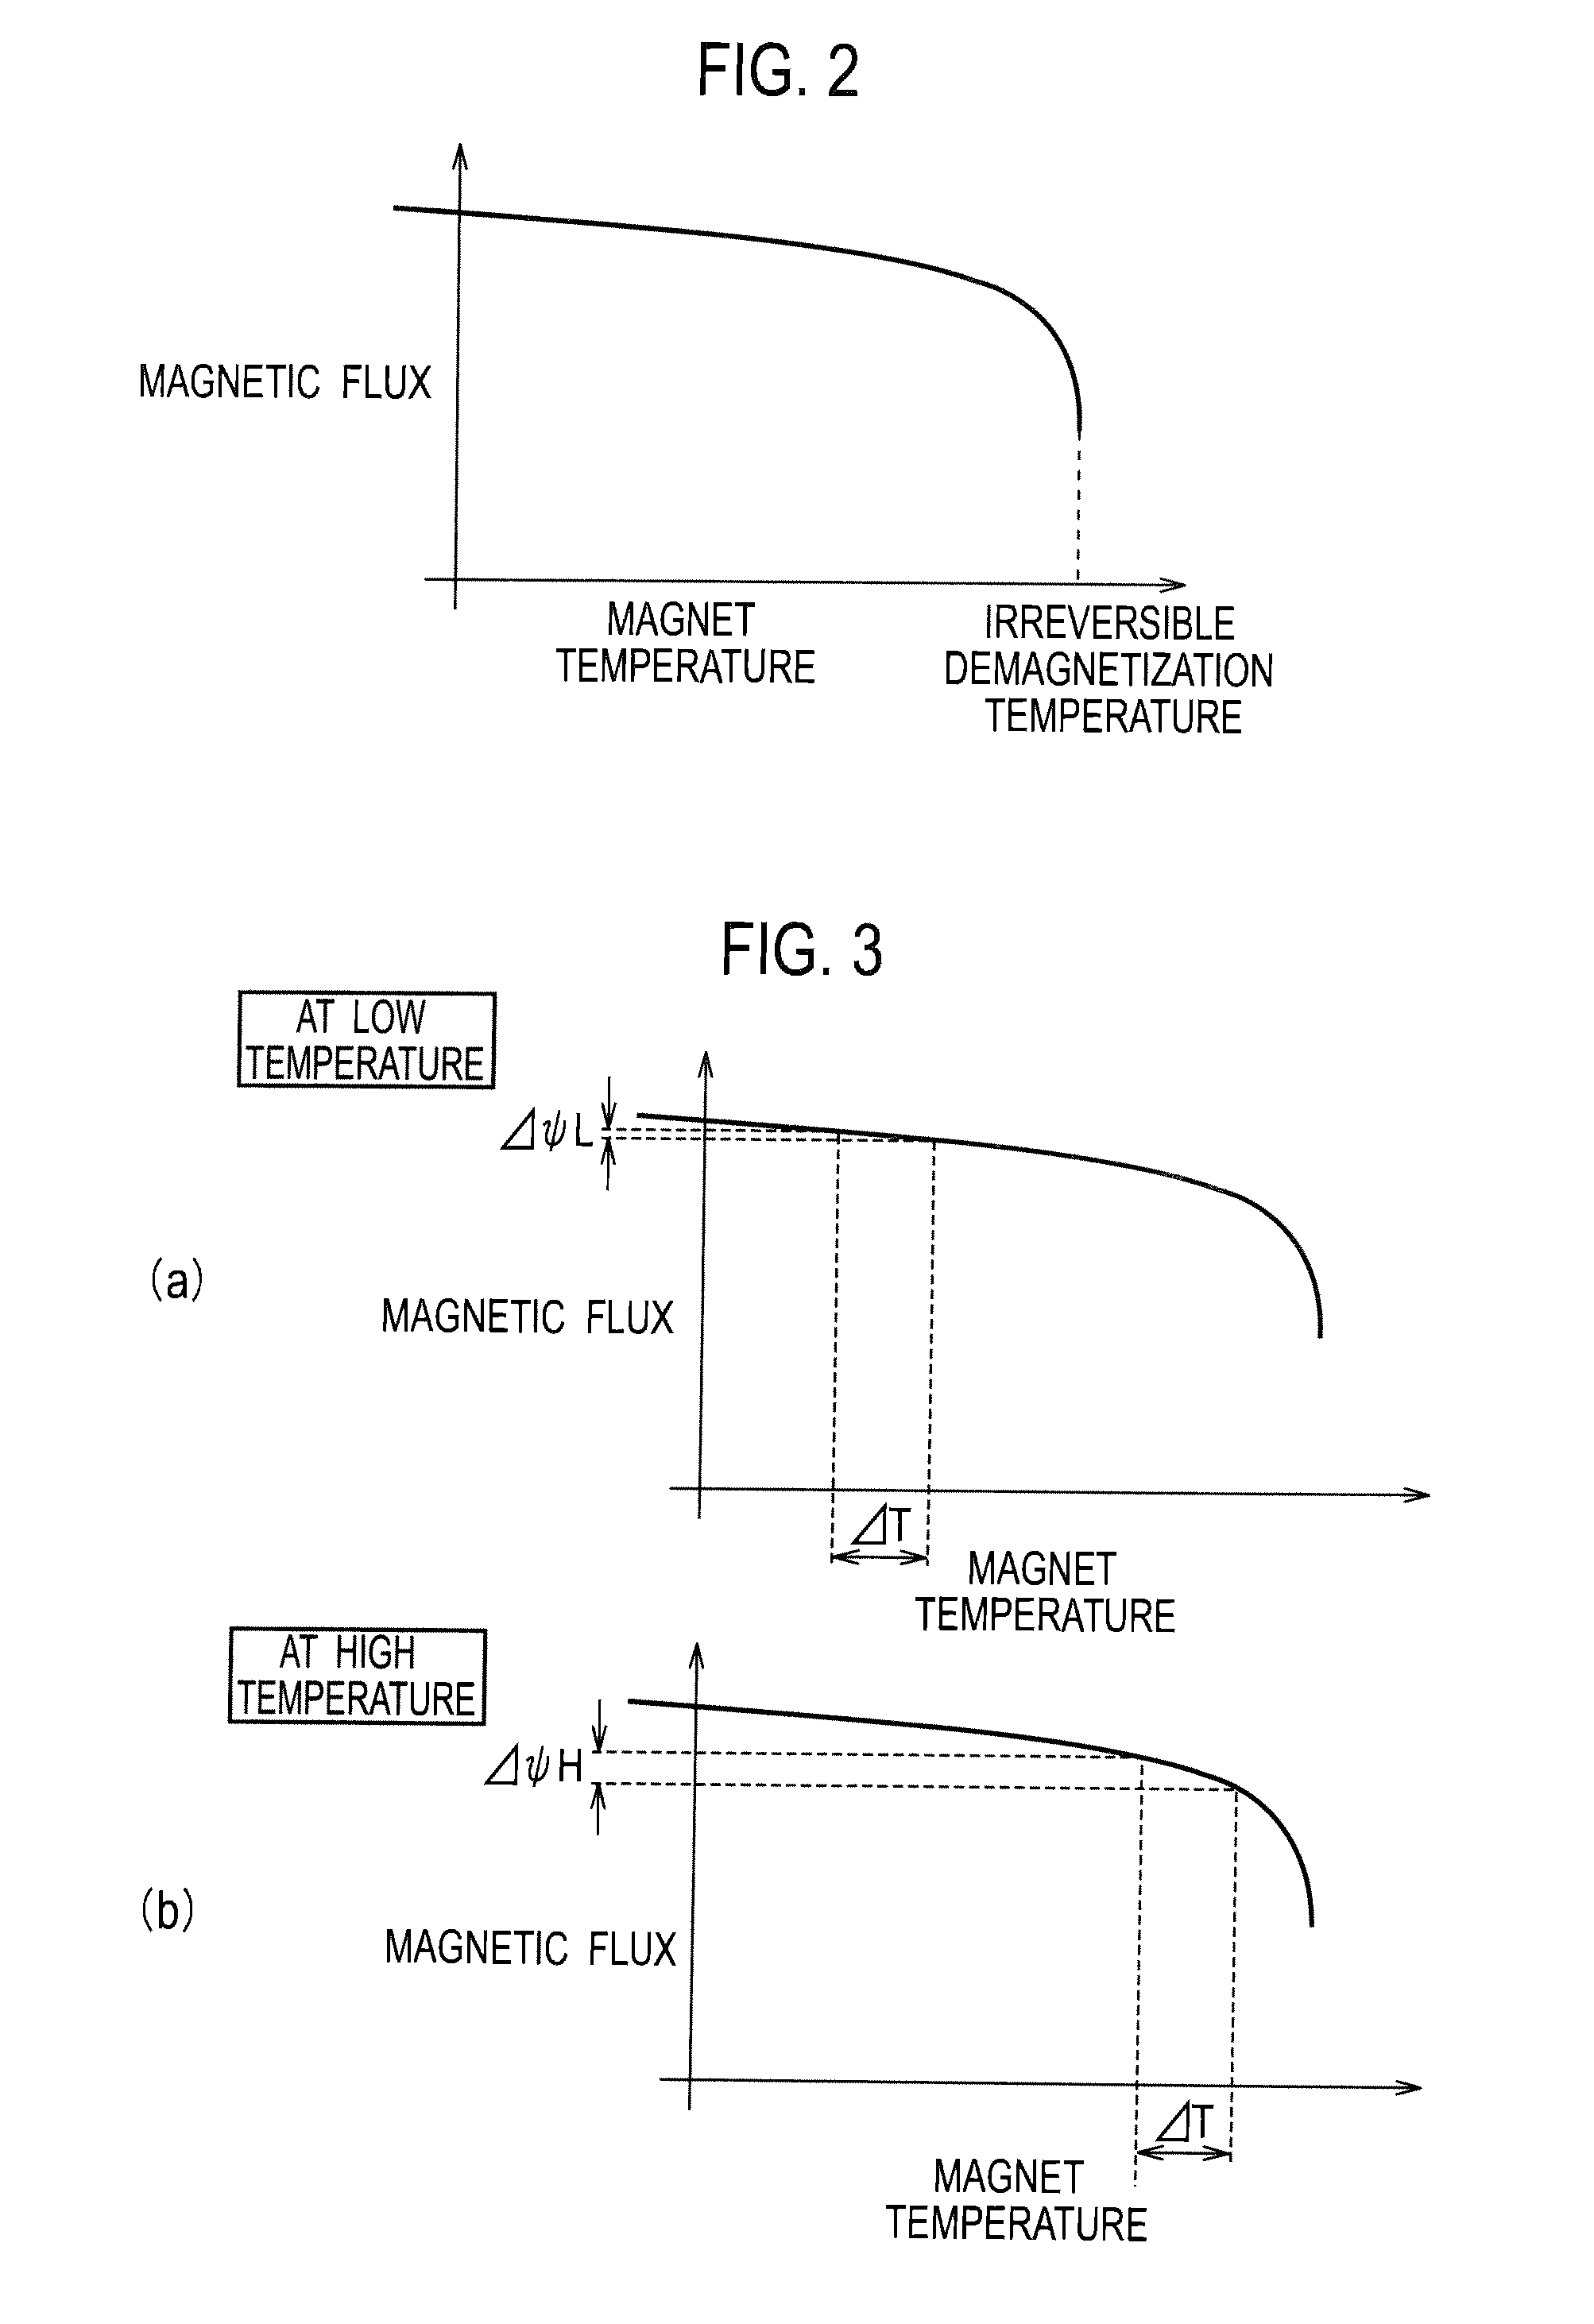 Anomaly detector of permanent magnet synchronous electric motor